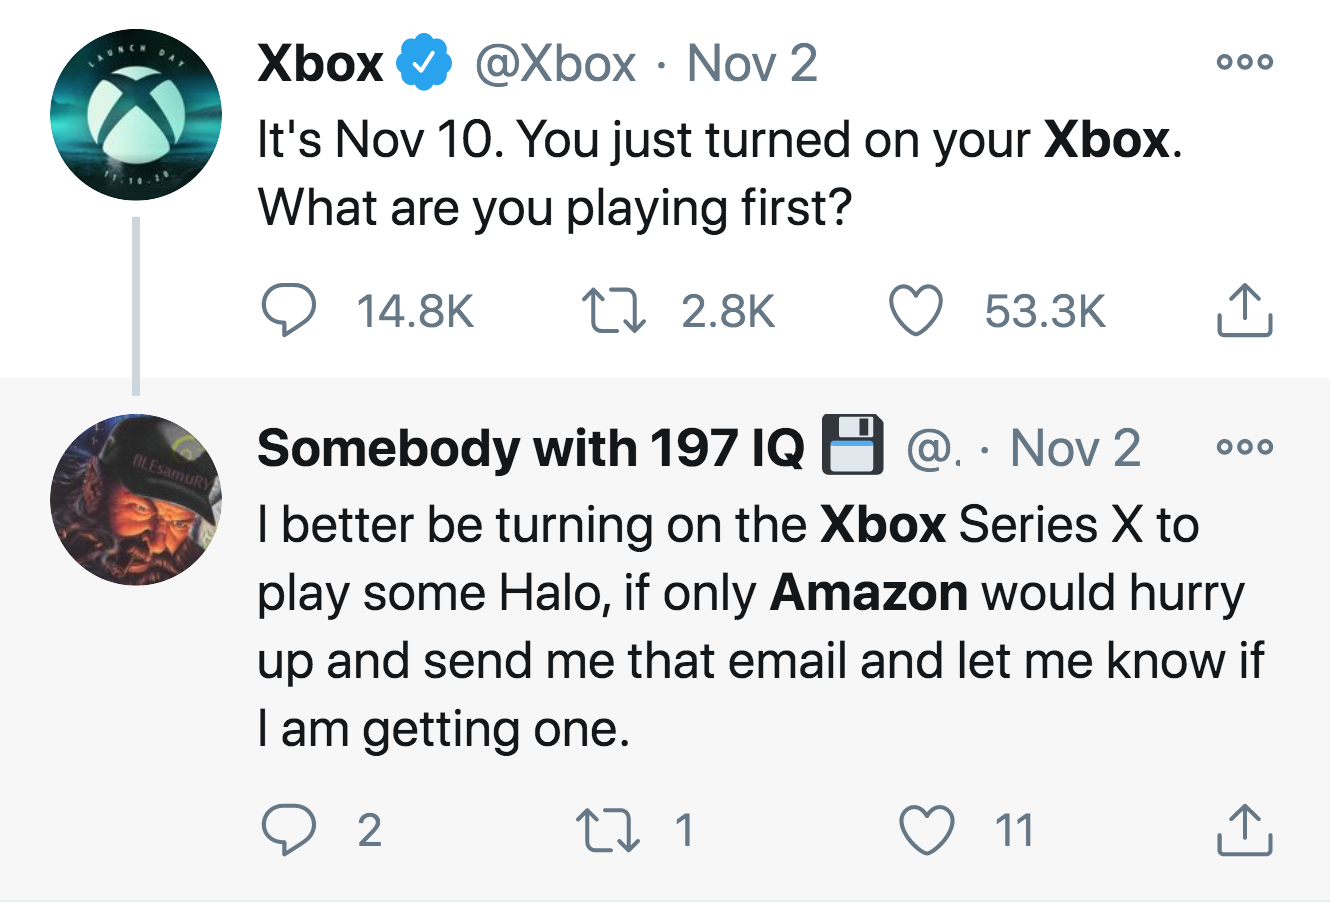 Xbox Nov 2 It's Nov 10. You just turned on your Xbox. What are you playing first? 27 Ooo AILEsamur Somebody with 197 Iq O @ Nov 2 I better be turning on the Xbox Series X to play some Halo, if only Amazon would hurry up and send me that email